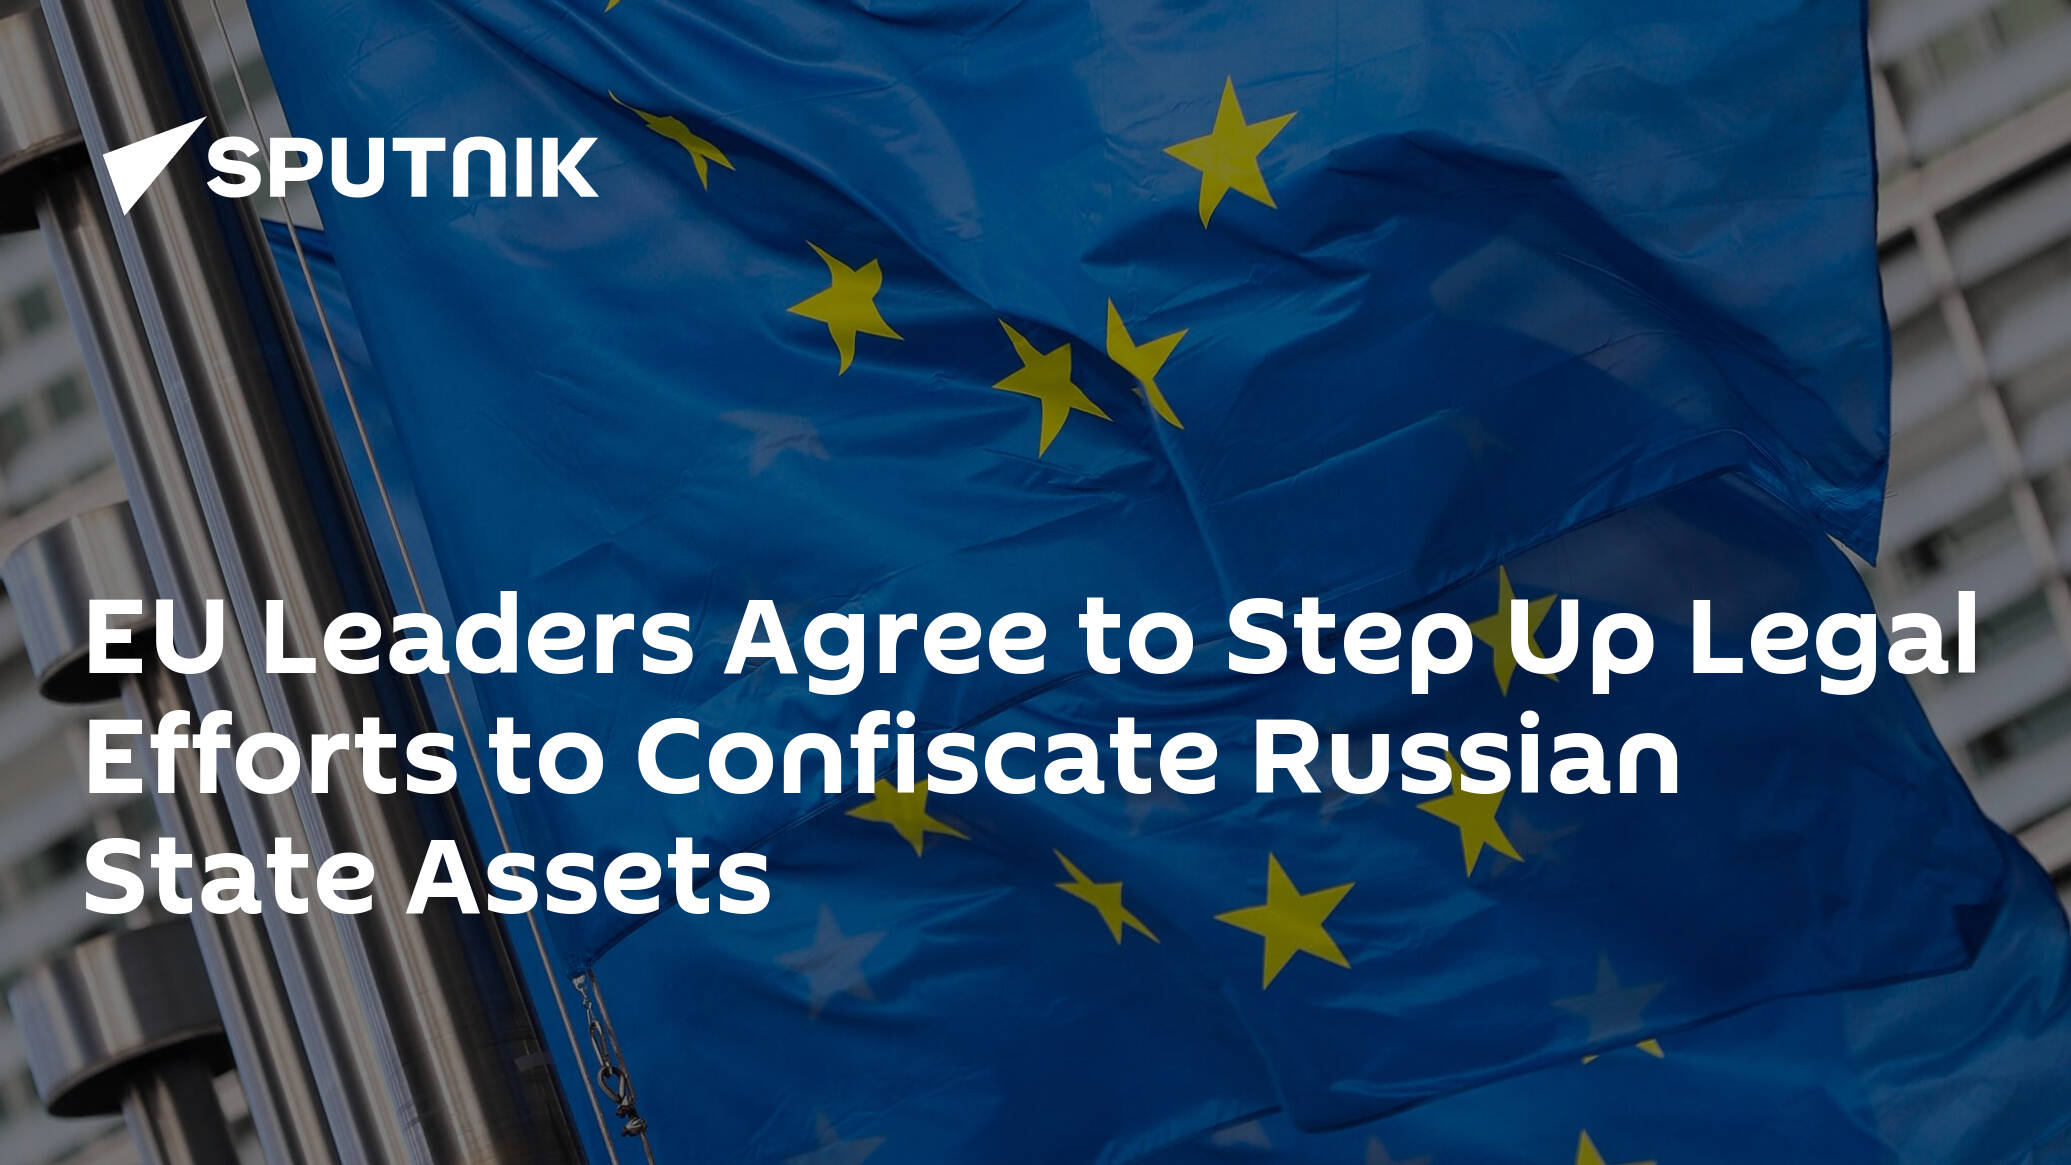 eu-leaders-agree-to-step-up-legal-efforts-to-confiscate-russian-state-assets